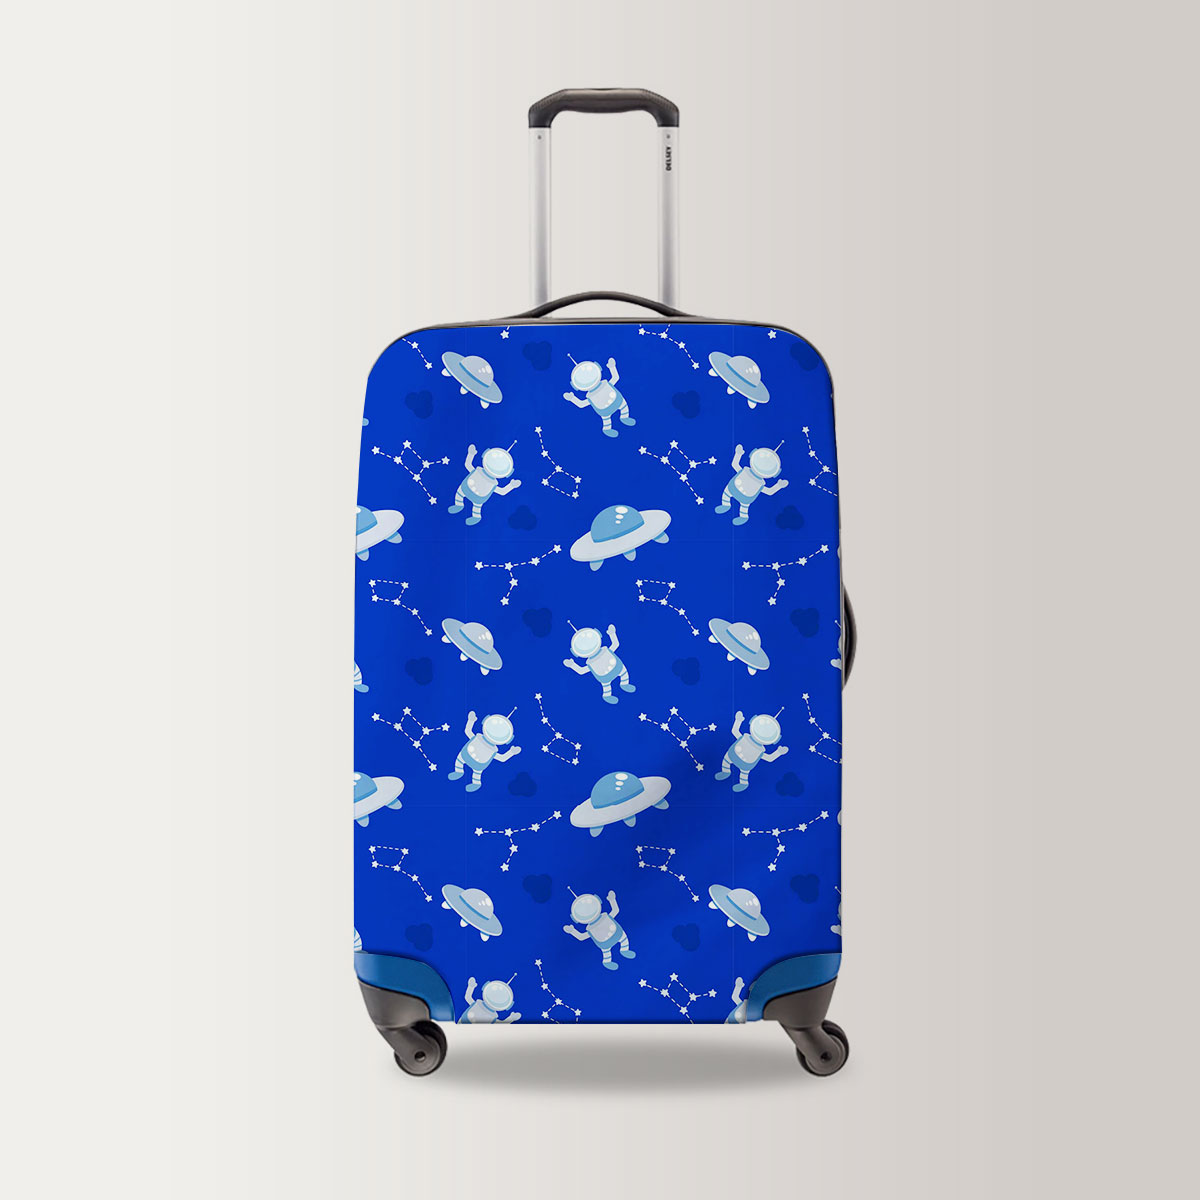 Astronauts Spaceships And Constellation Luggage Bag